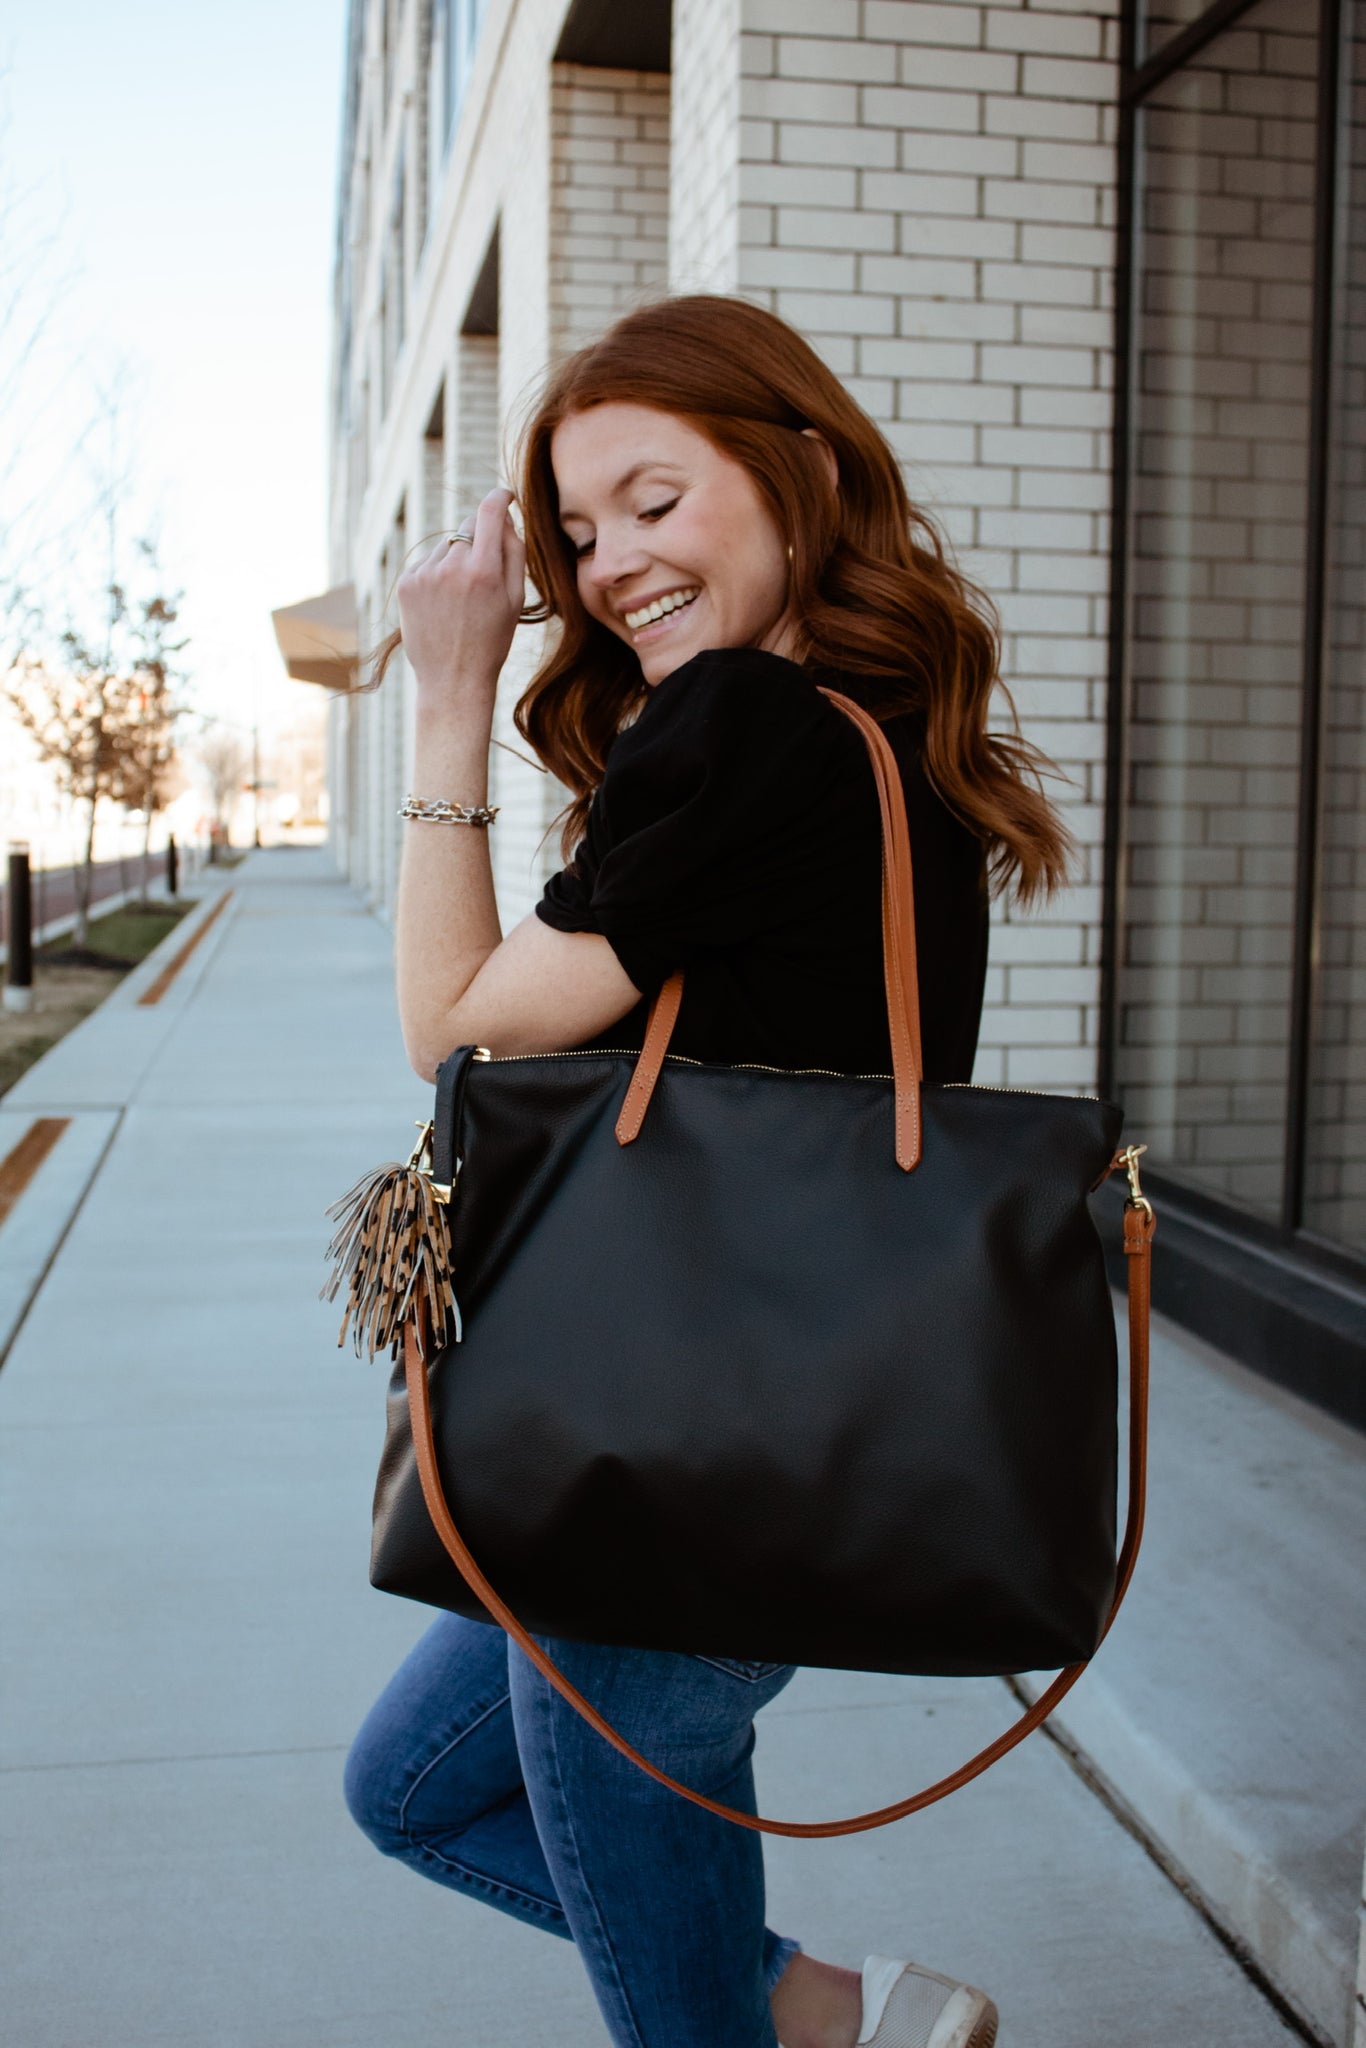 Carry All | Black with Tan Straps (New) - K.Slade